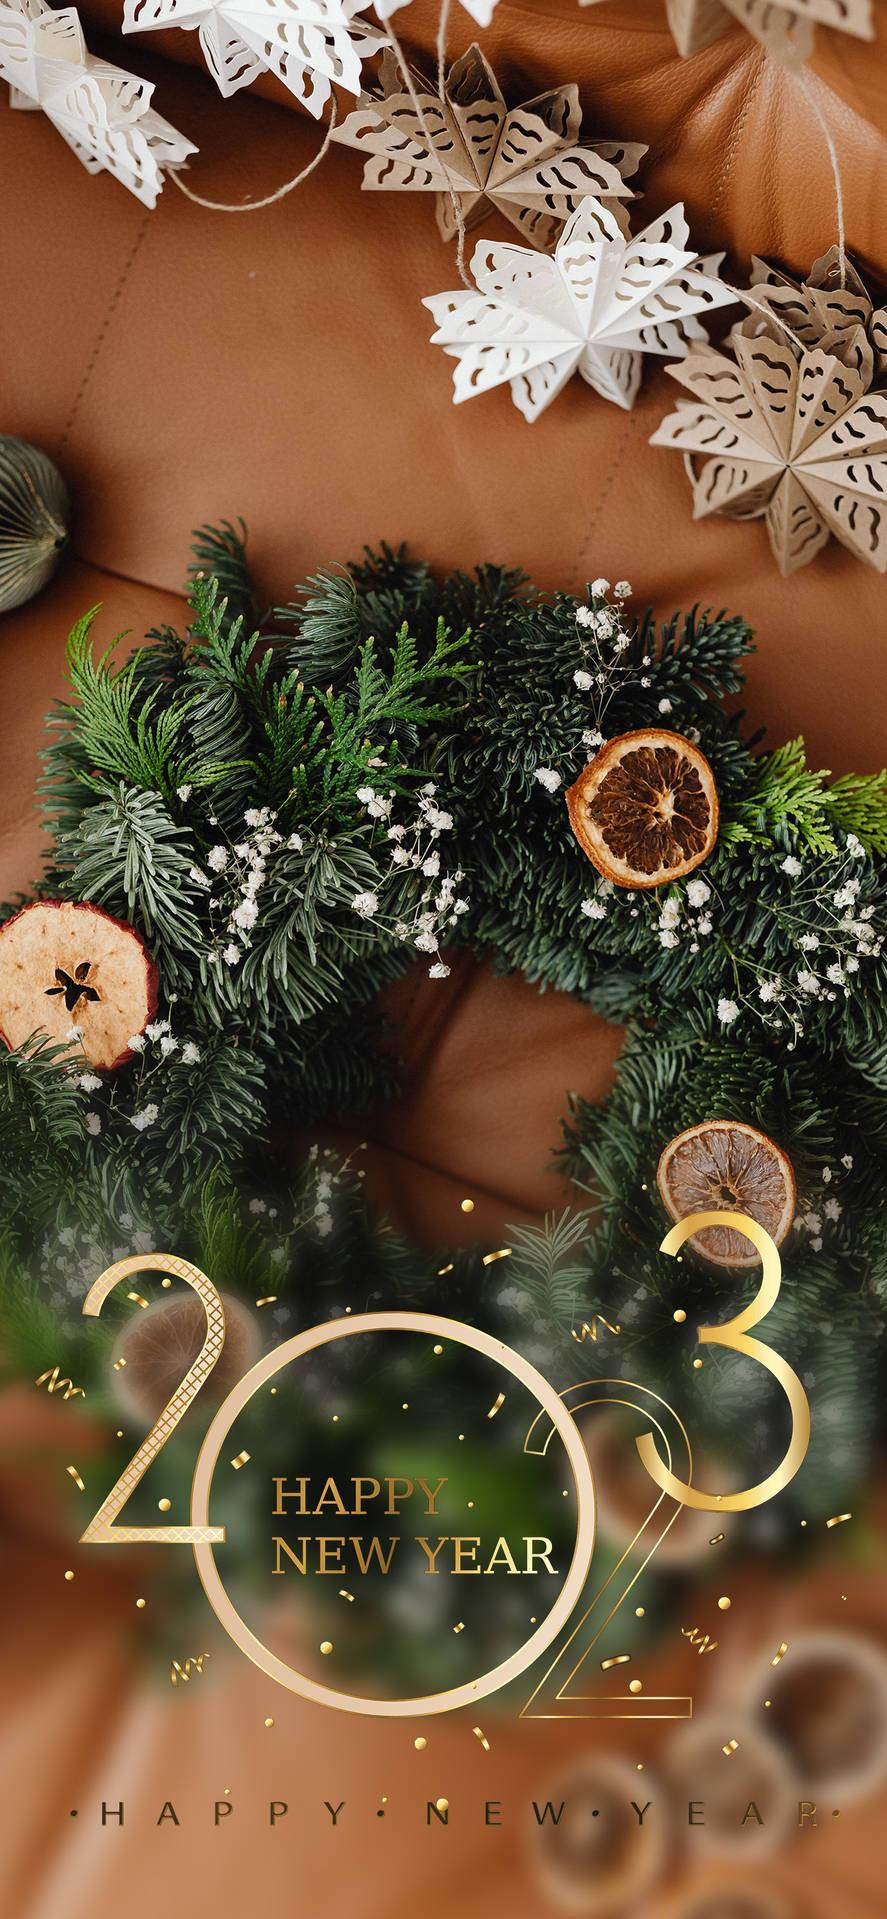 Happy New Year Holiday Wreath Wallpaper